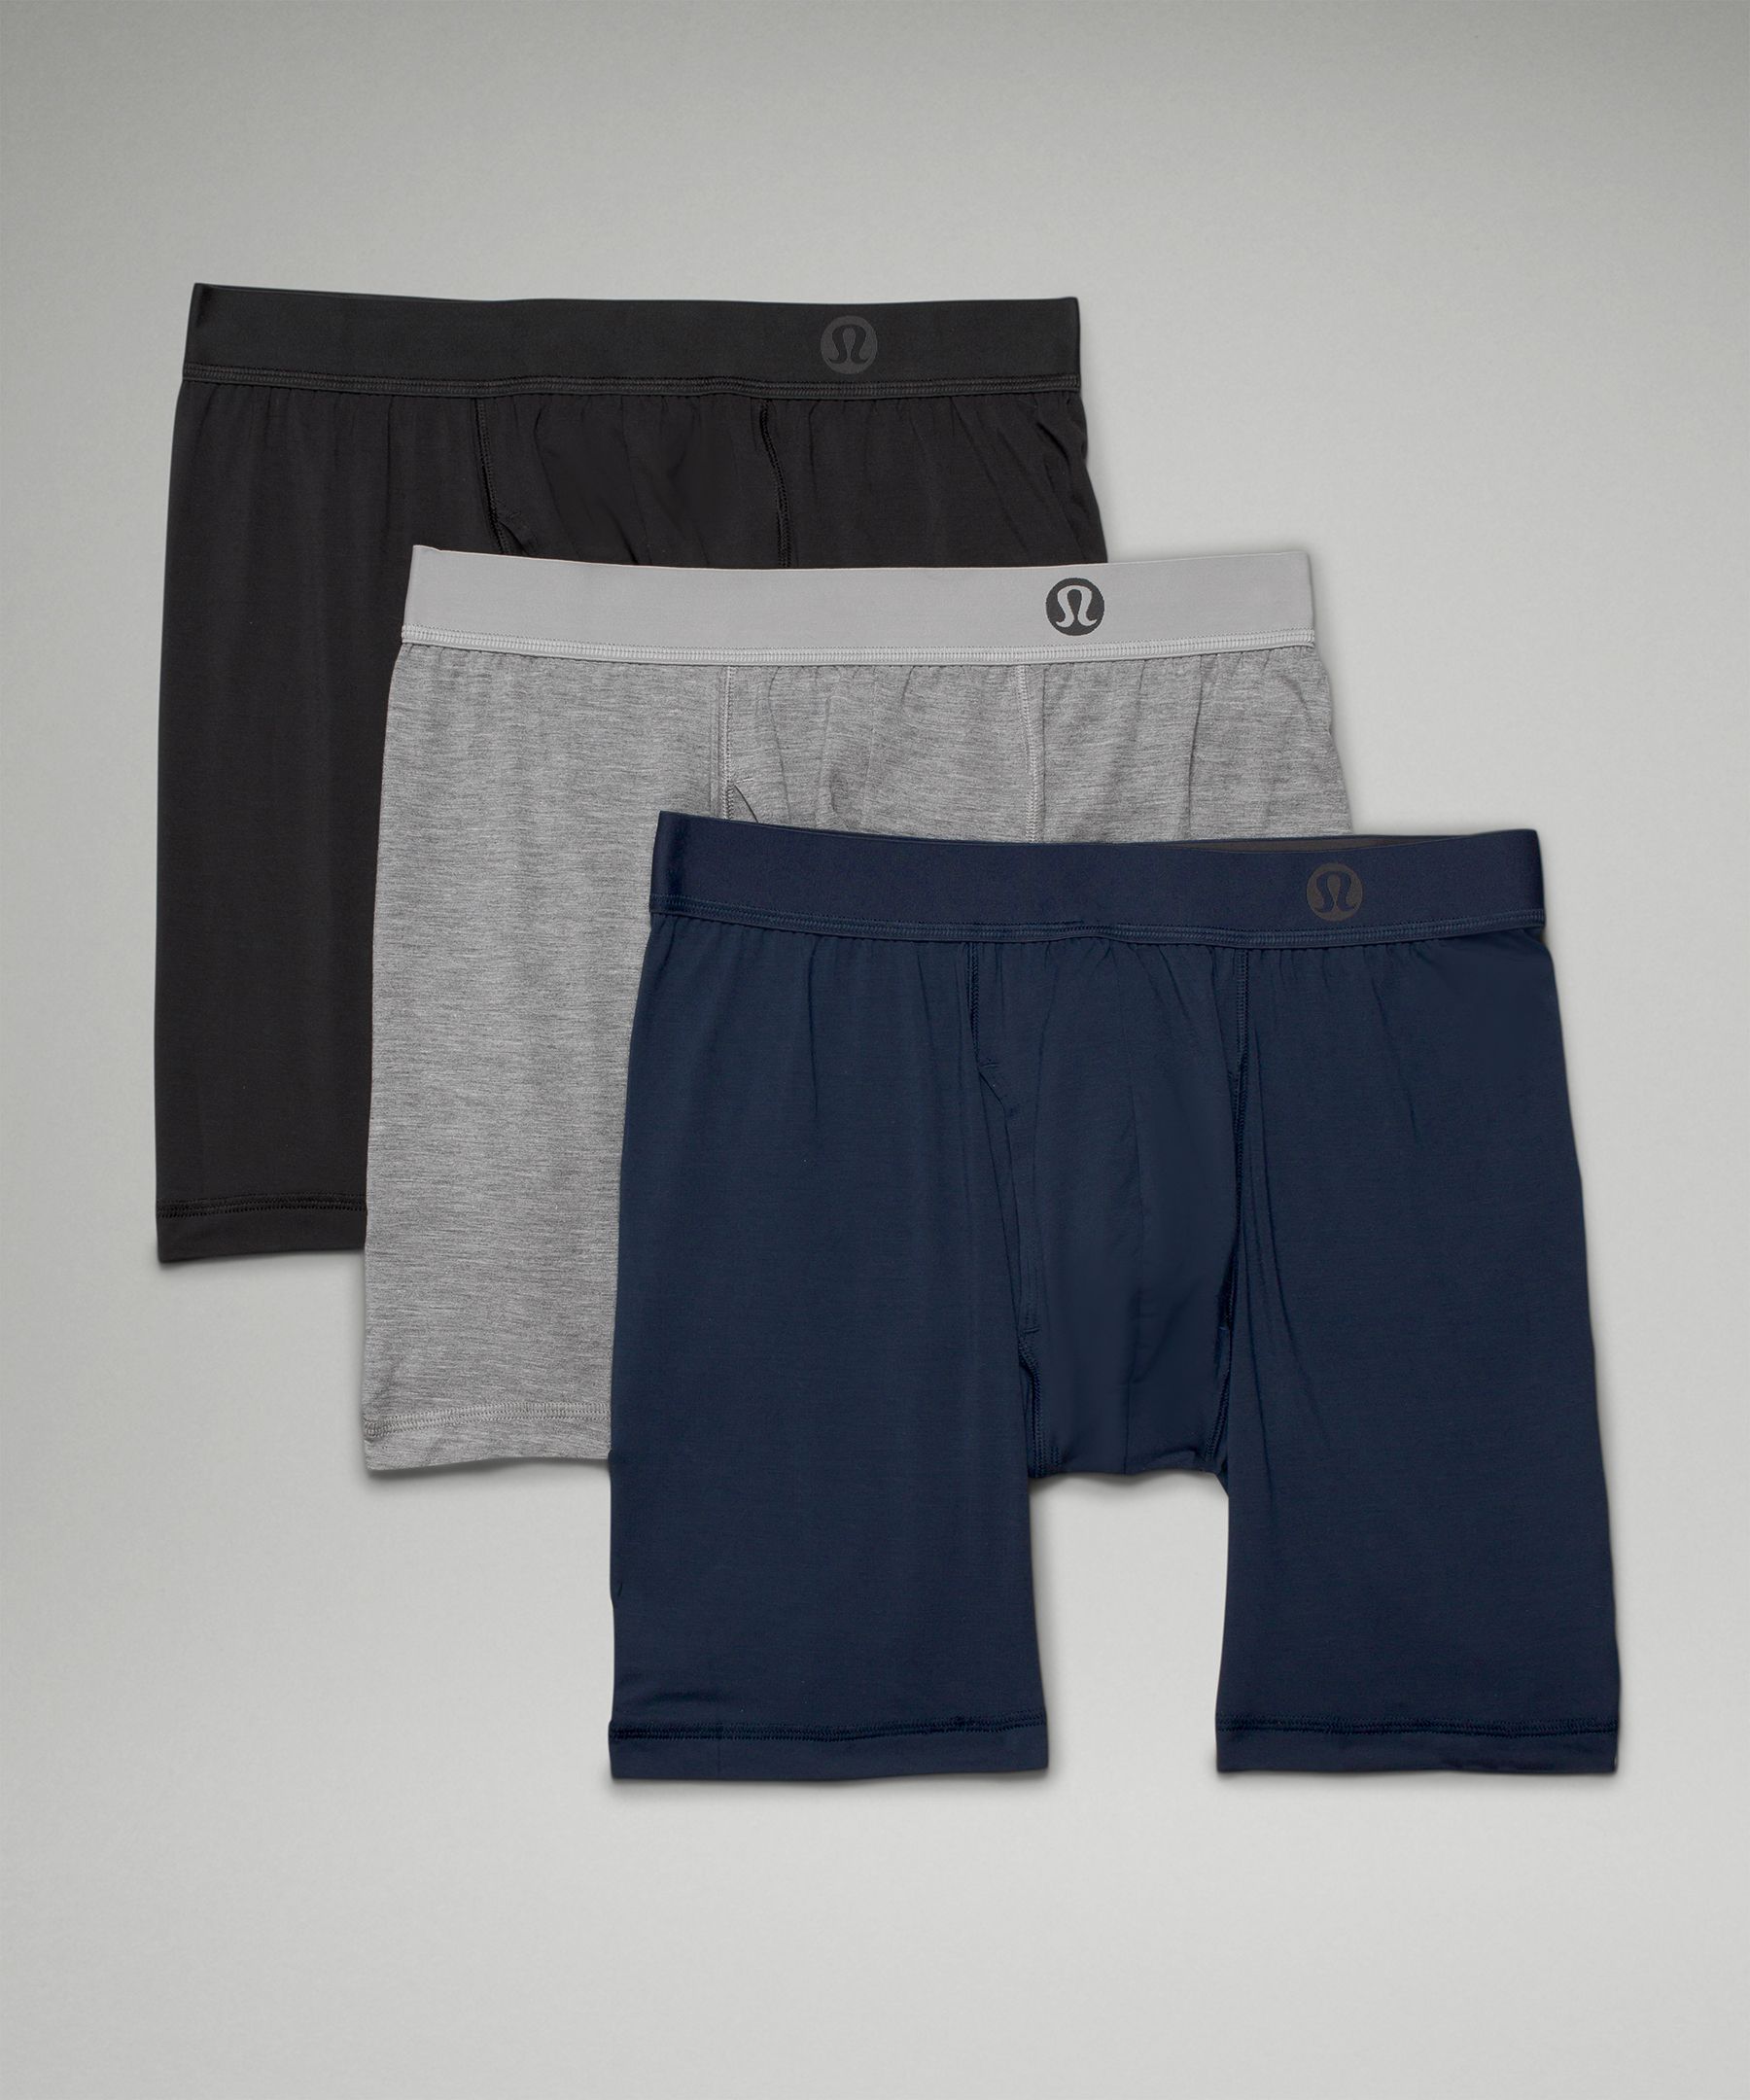 Lululemon Always In Motion Long Boxers With Fly 7" 3 Pack In Black/heathered Core Medium Grey/true Navy